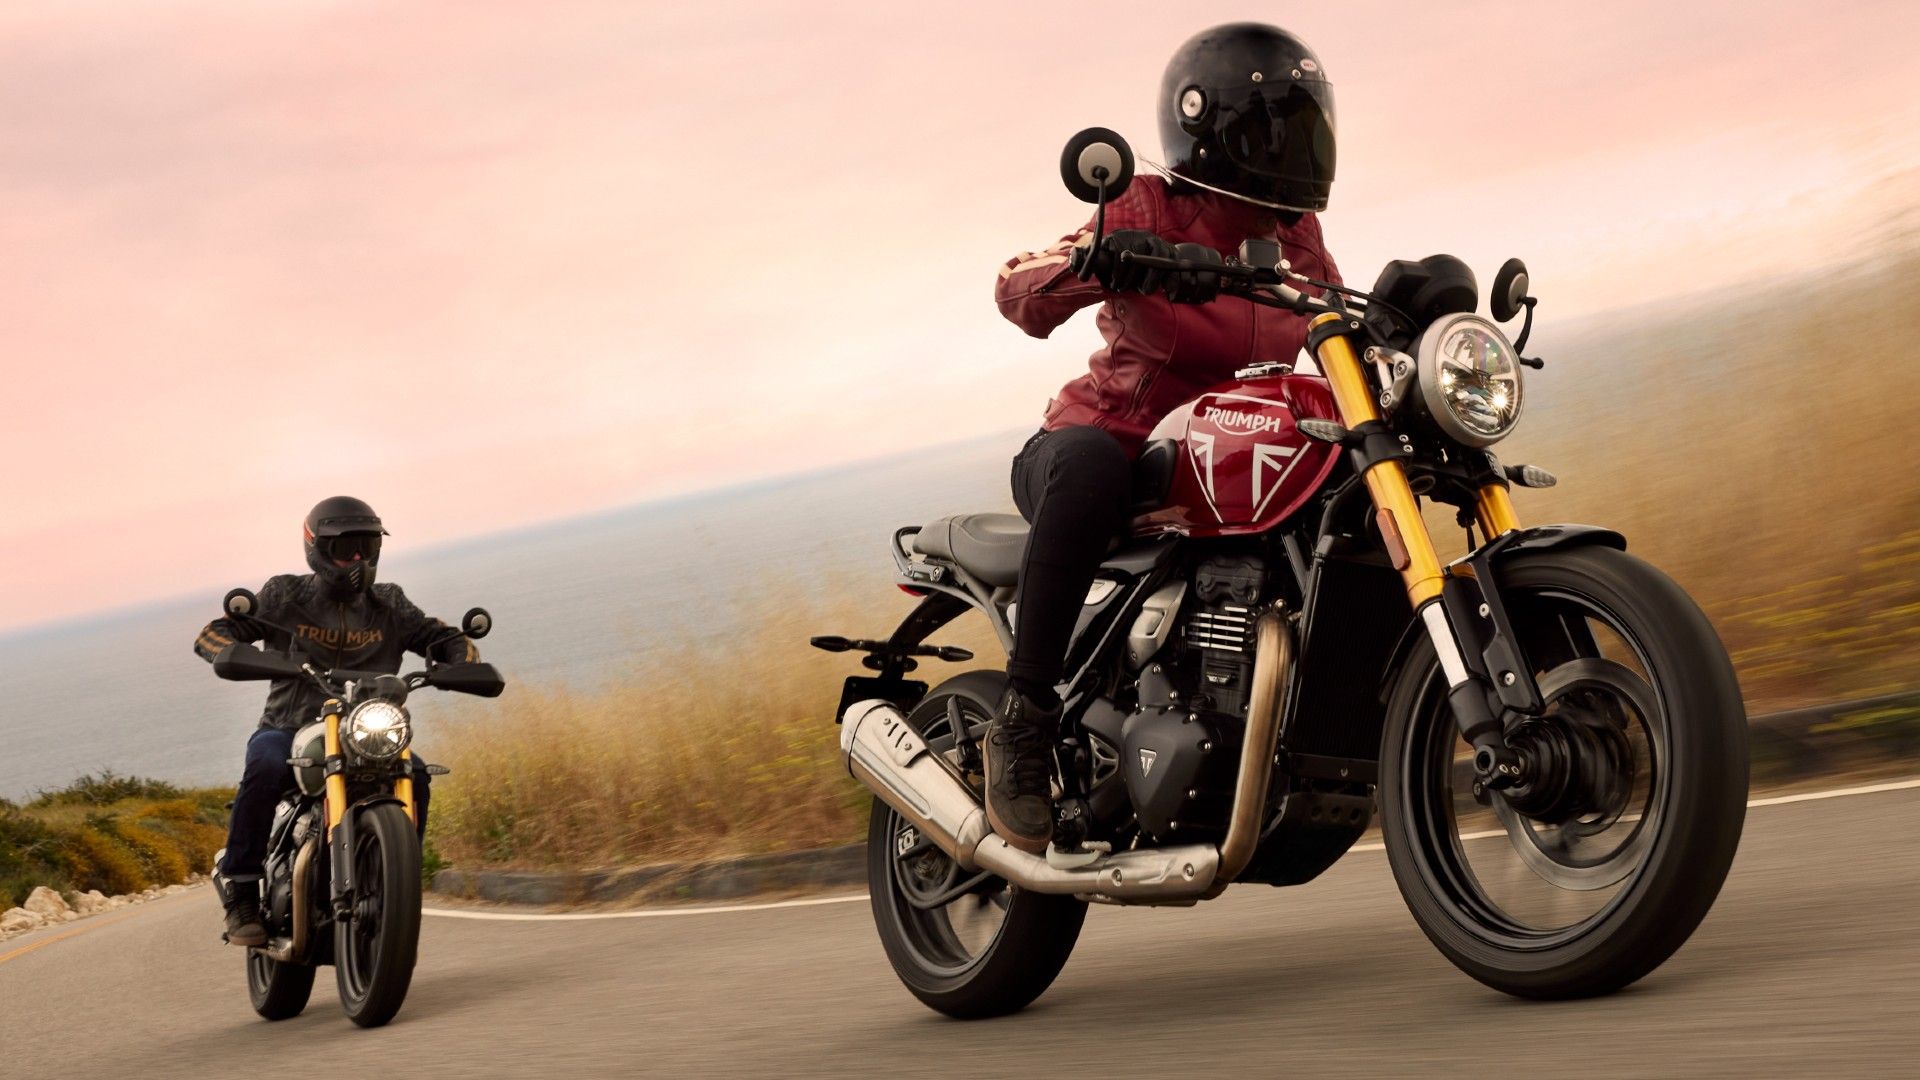 2024 Triumph Speed 400 And Scrambler 400 Are Here To Disrupt The Entry